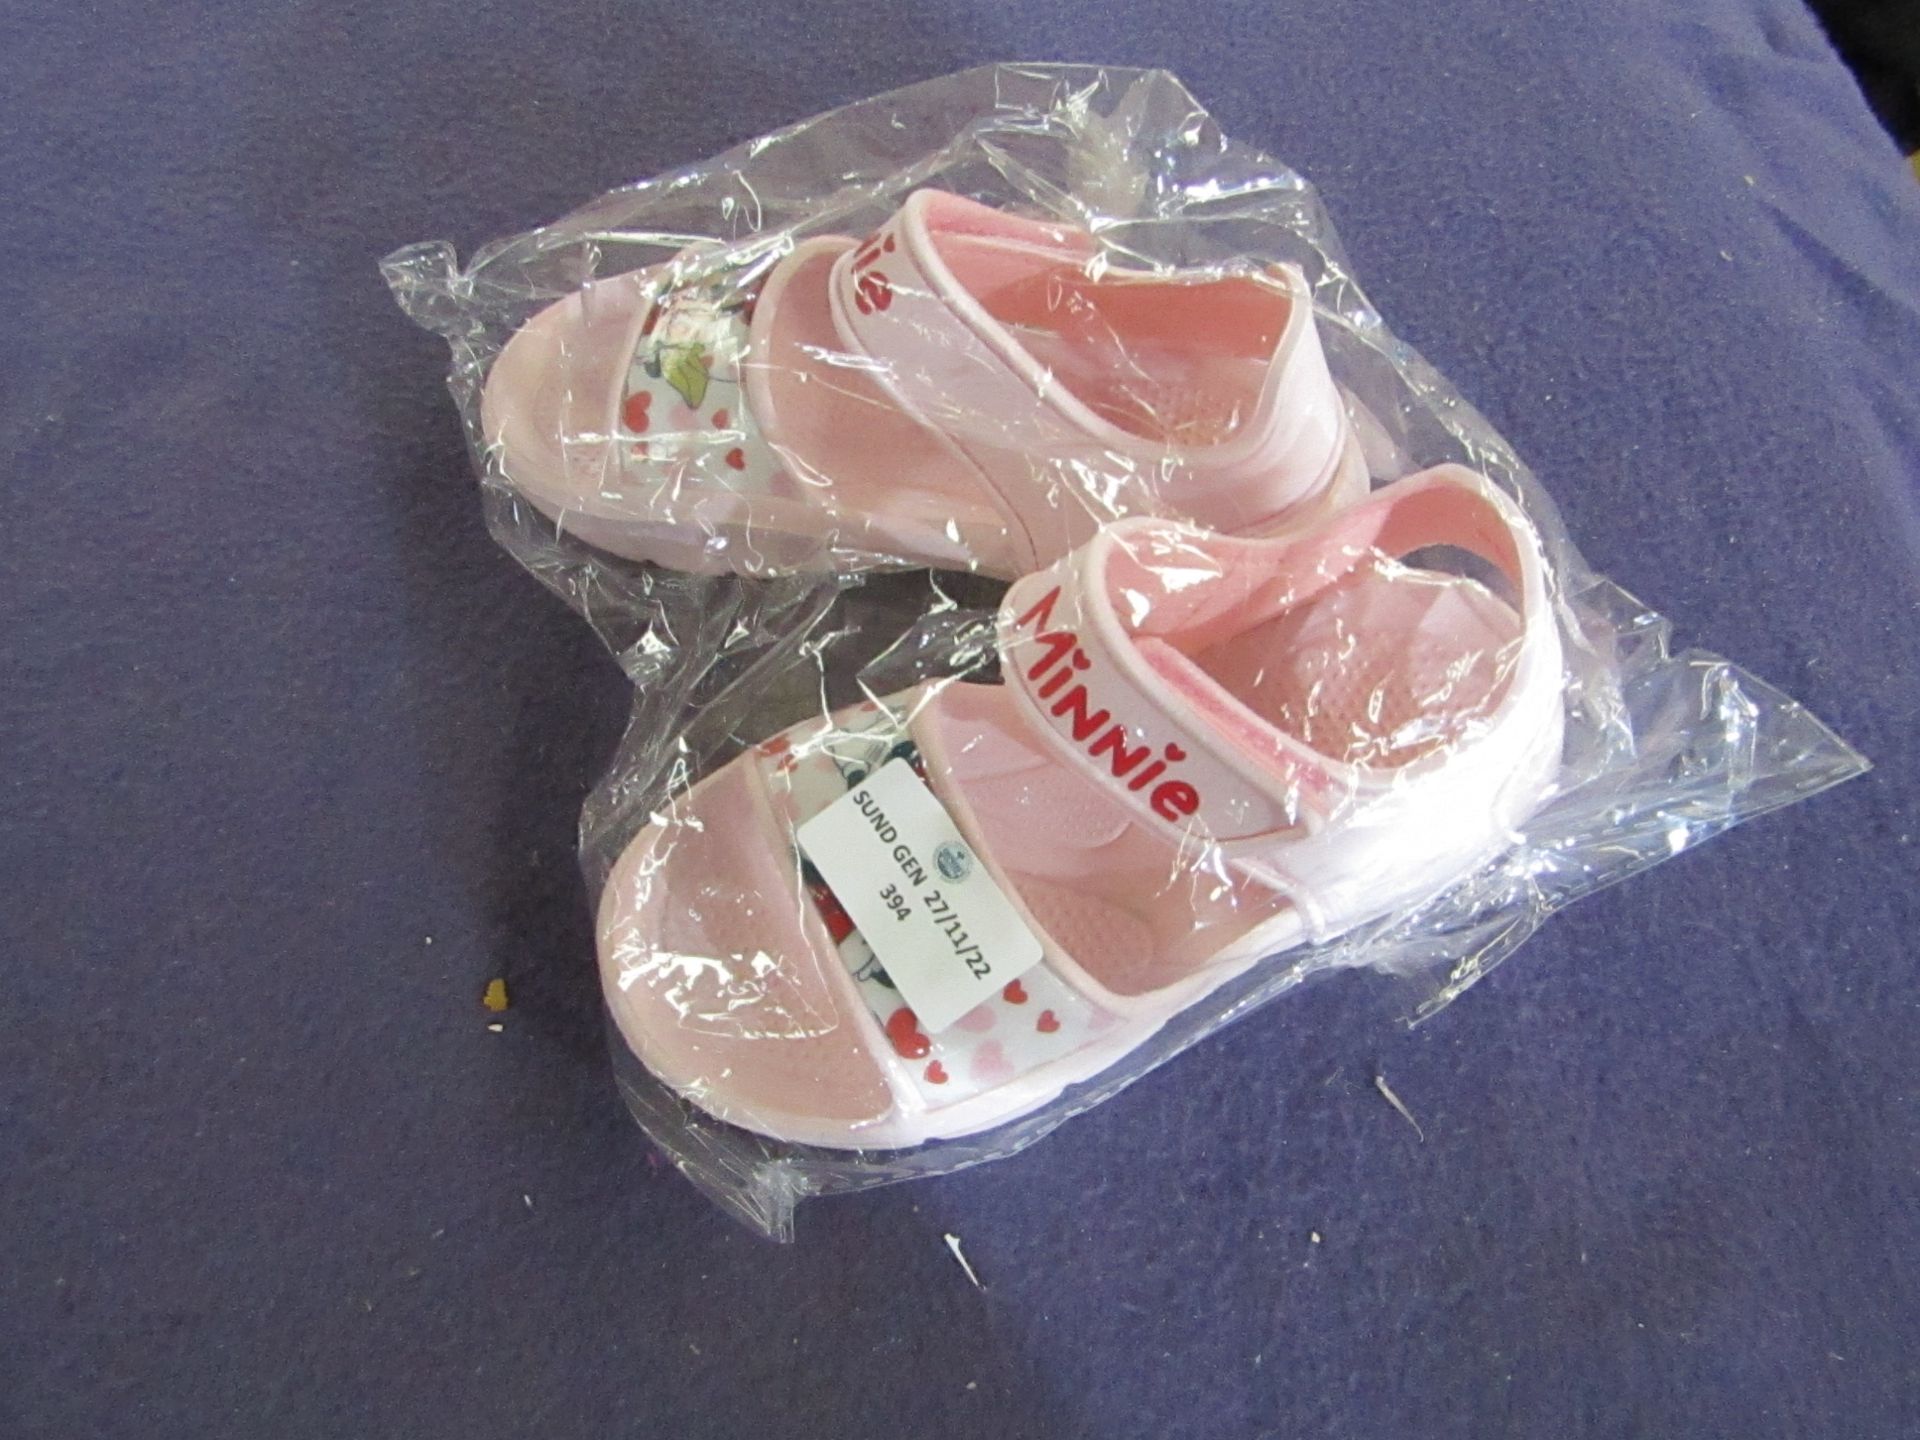 Minnie Mouse - Sandles - Size 26/27 - Unused & Packaged.